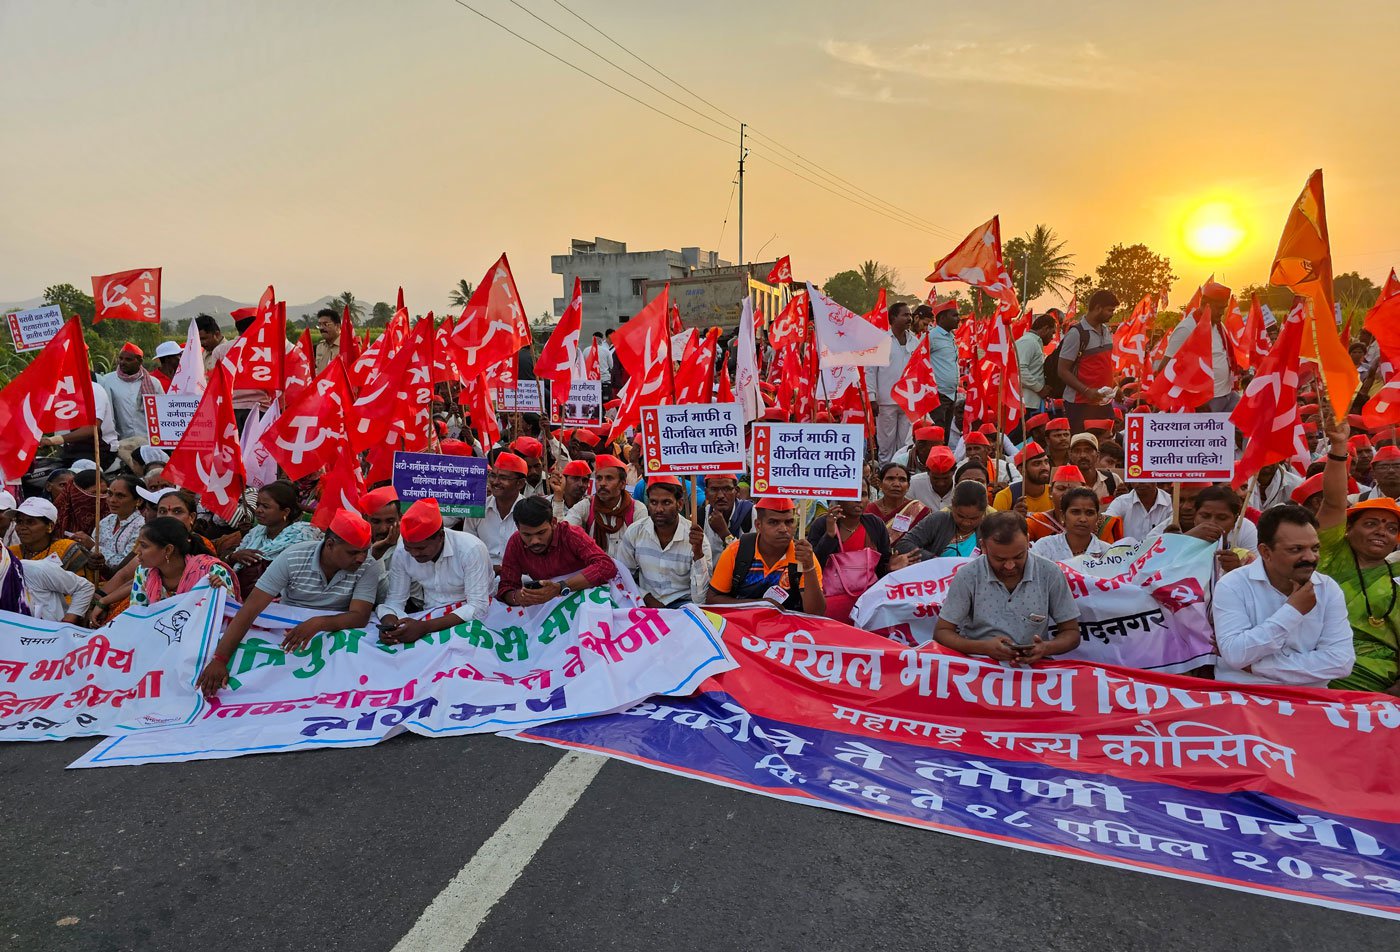 The sight of thousands of farmers intently marching towards the revenue minister’s house has set off alarm bells for the state government. Three ministers in the present government – revenue, tribal affairs and labour – are expected to arrive at the venue to negotiate the demands